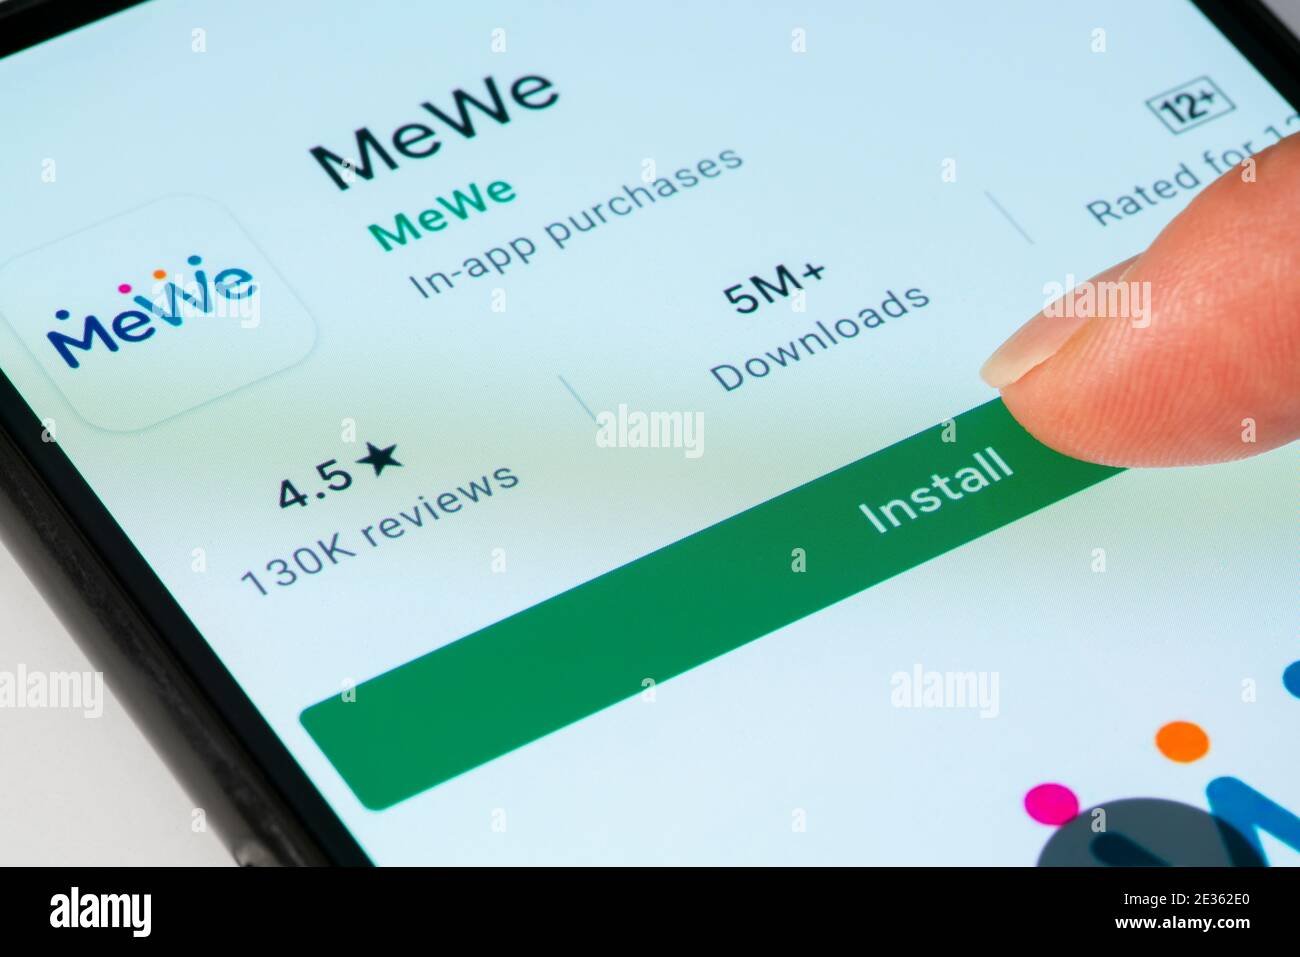 Close-up view of installing MeWe app on a smartphone Stock Photo